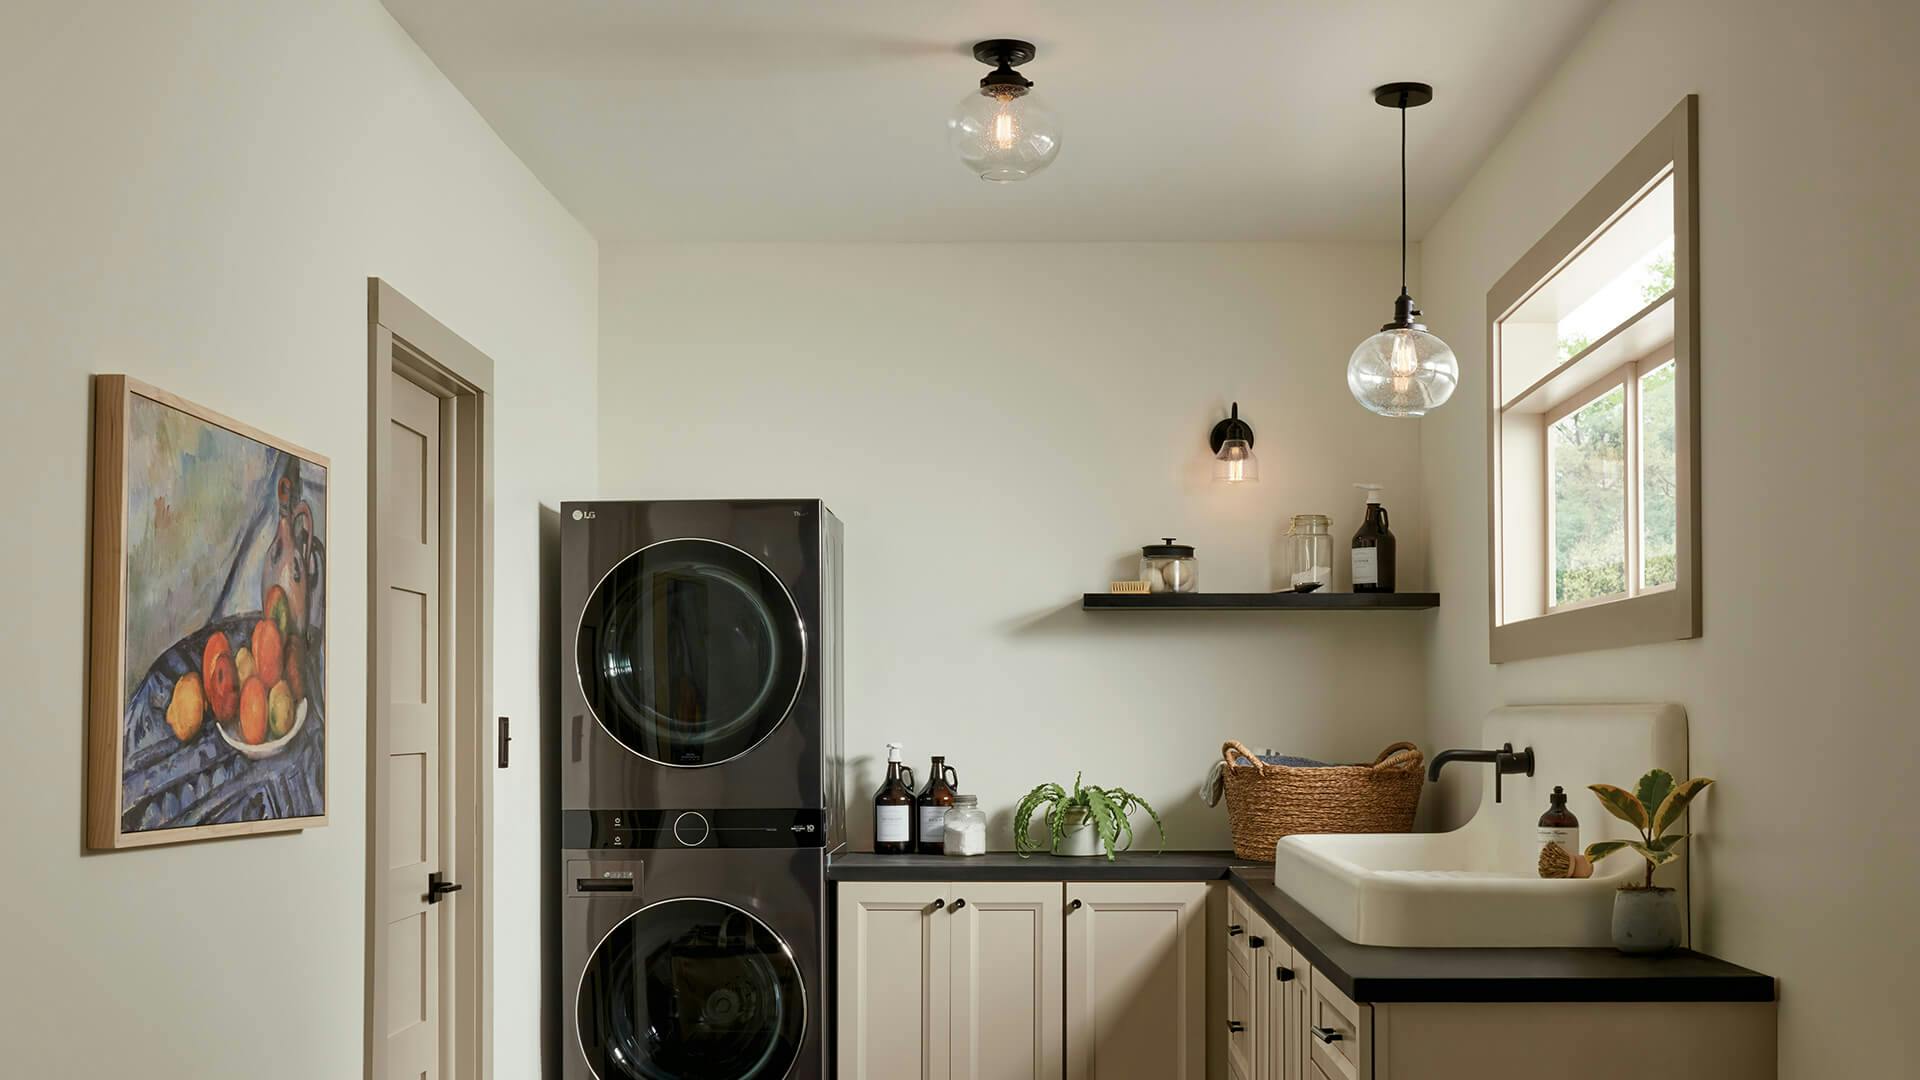 Laundry room during the day with cream accents featuring Avery pendant lights in black finish